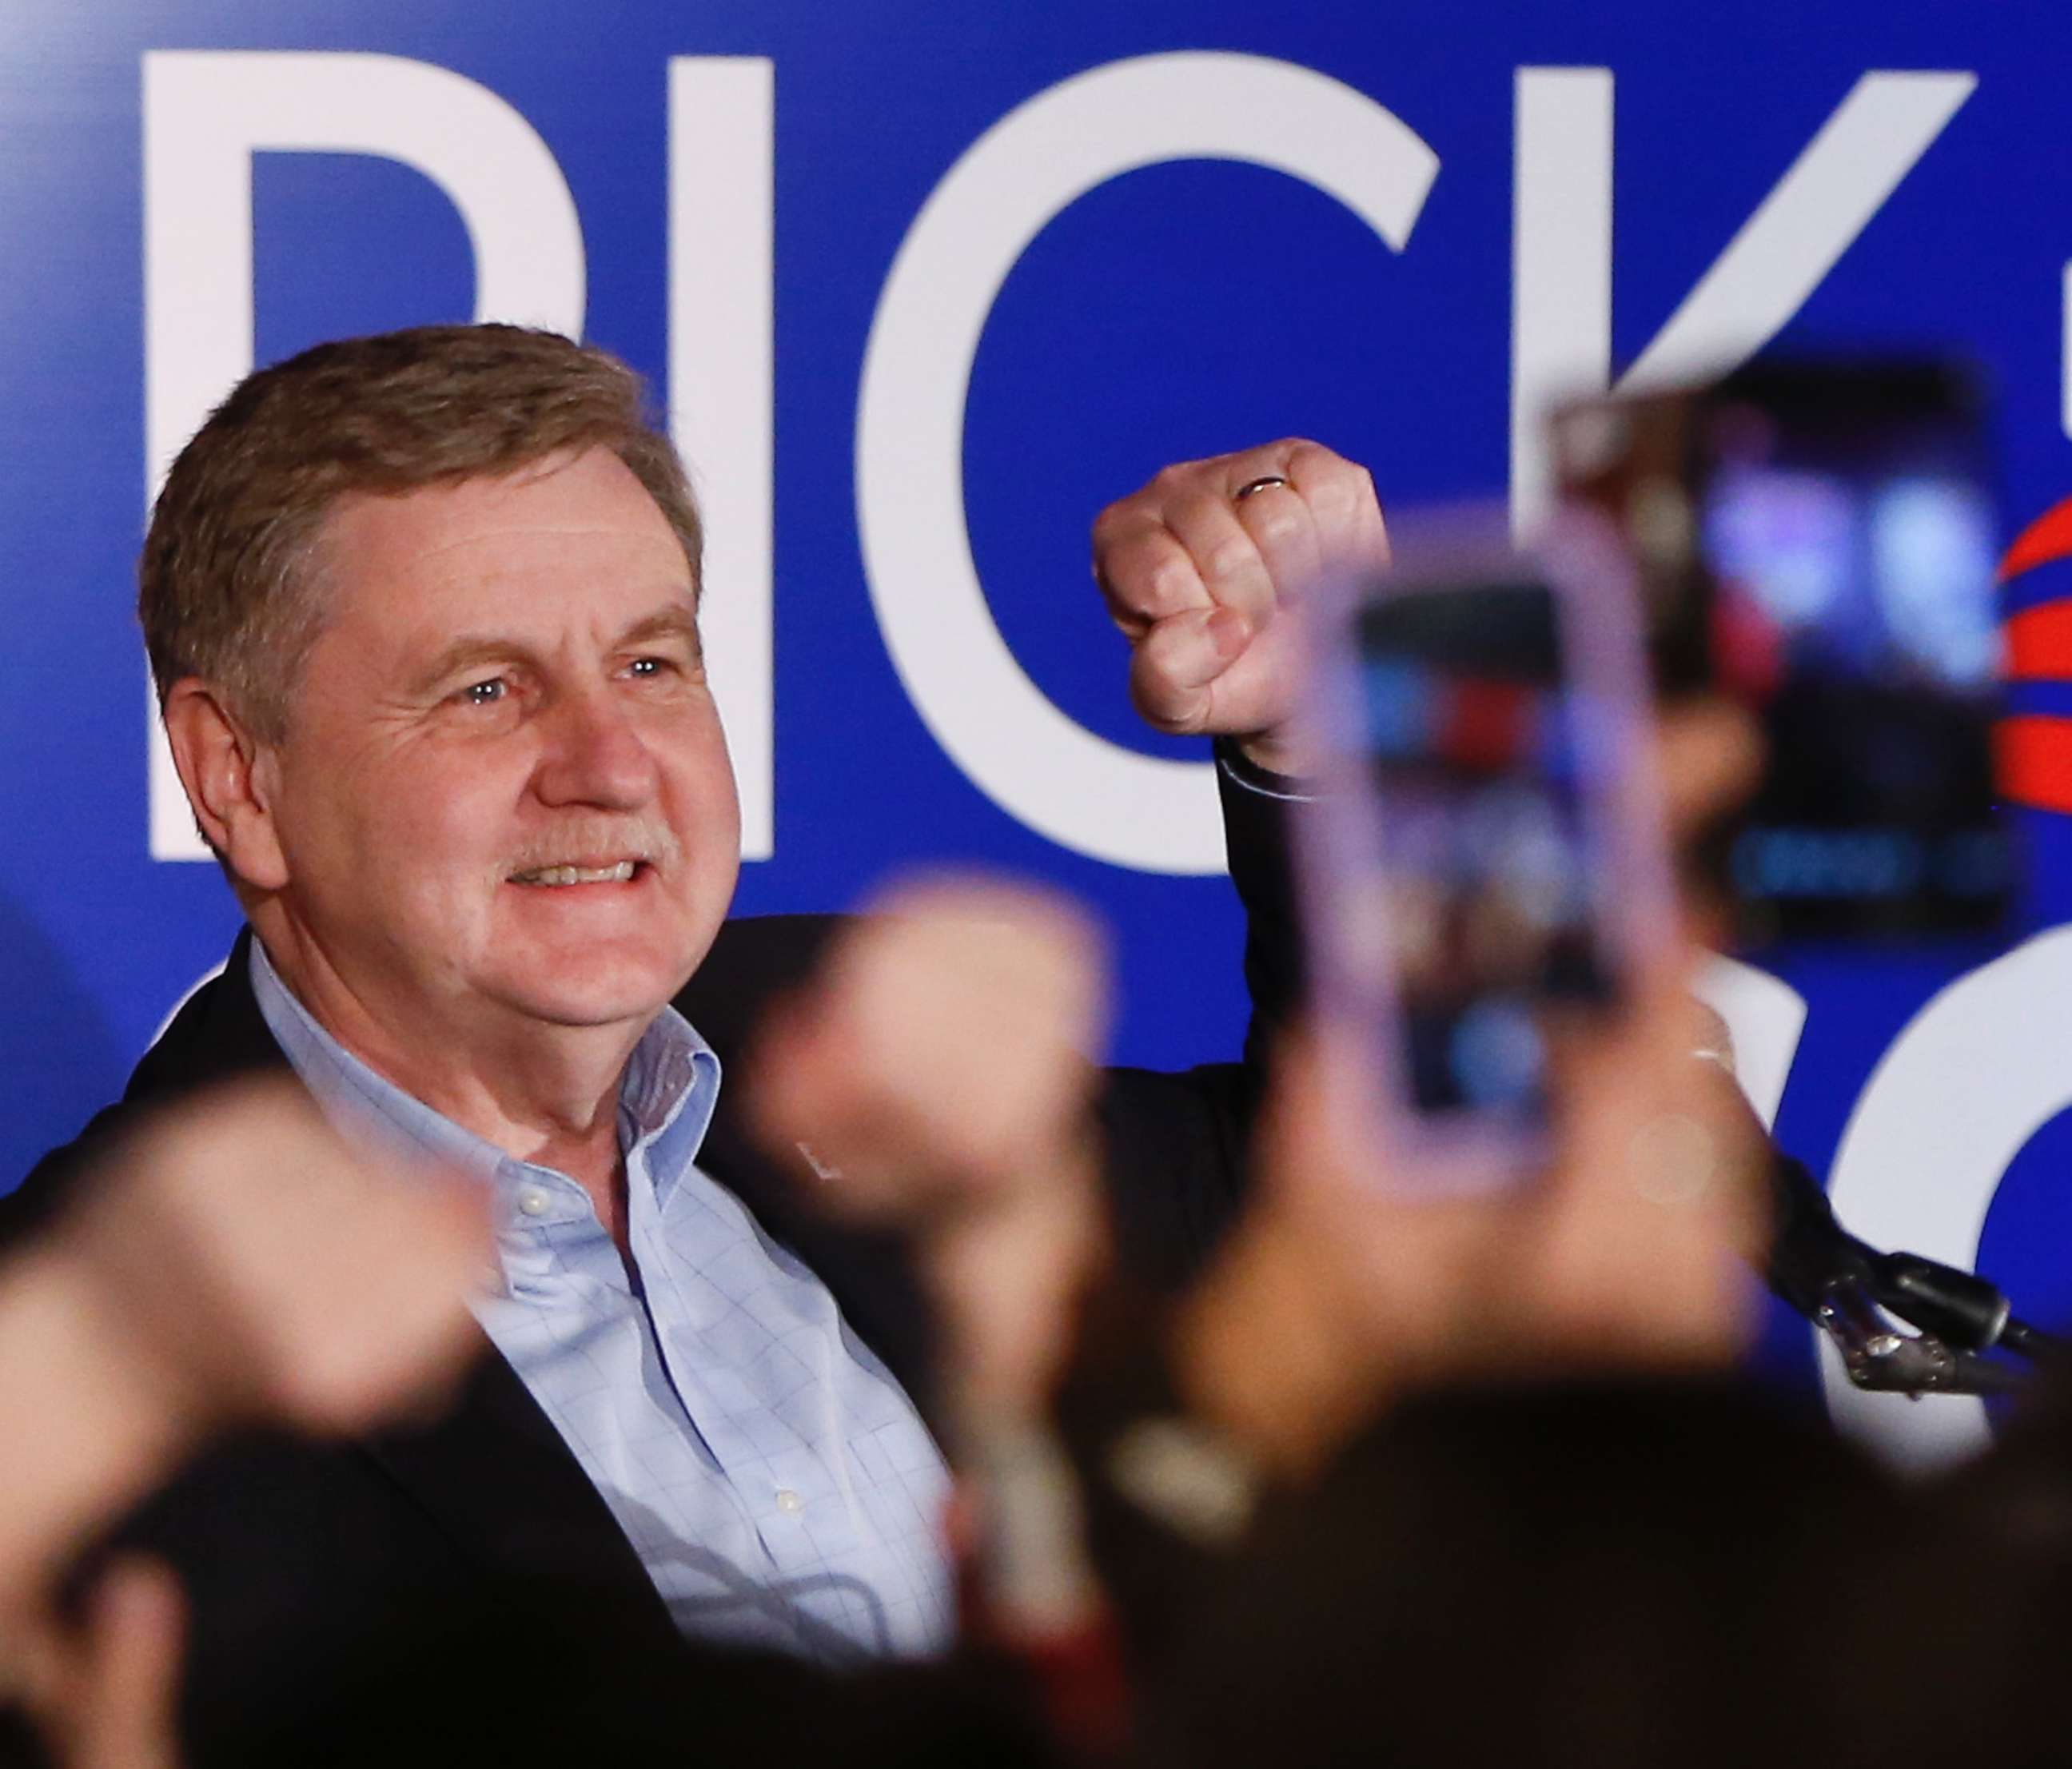 PHOTO: Republican Rick Saccone pumps his fist as he thanks supporters at the party watching the returns for a special election being held for the Pennsylvania 18th Congressional District, March 13, 2018 in McKeesport, Pa.